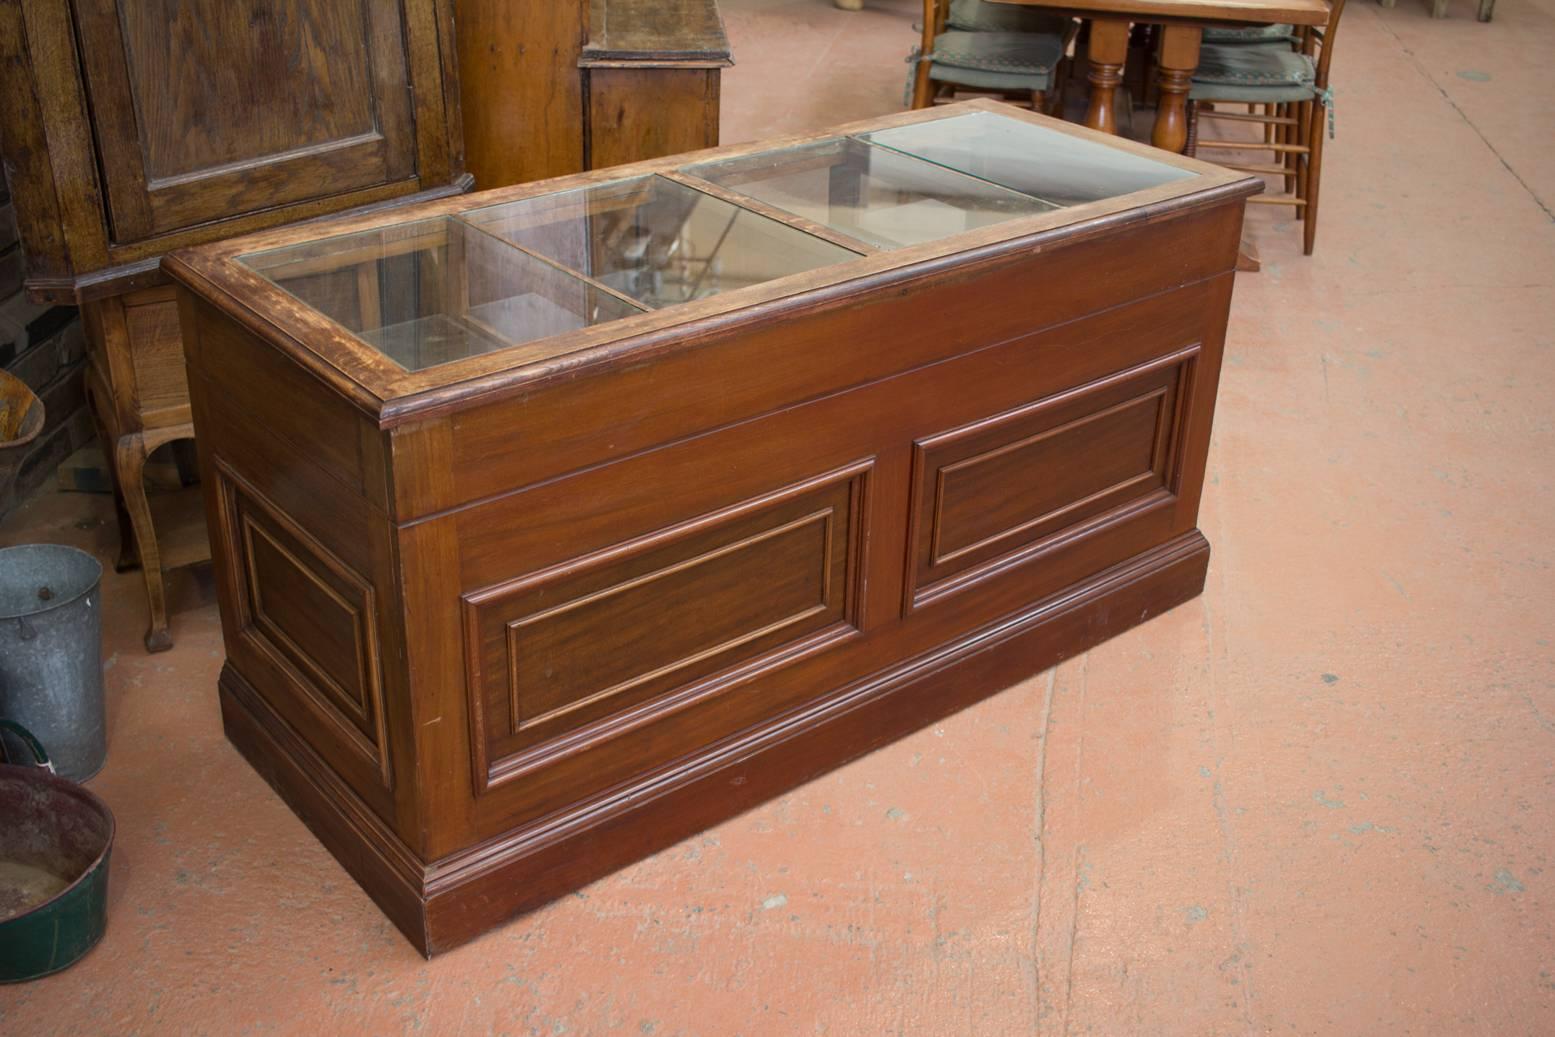 Antique oak and mahogany haberdashery cabinet with inset glass panels to top over wooden slides and fall front cupboards.
 